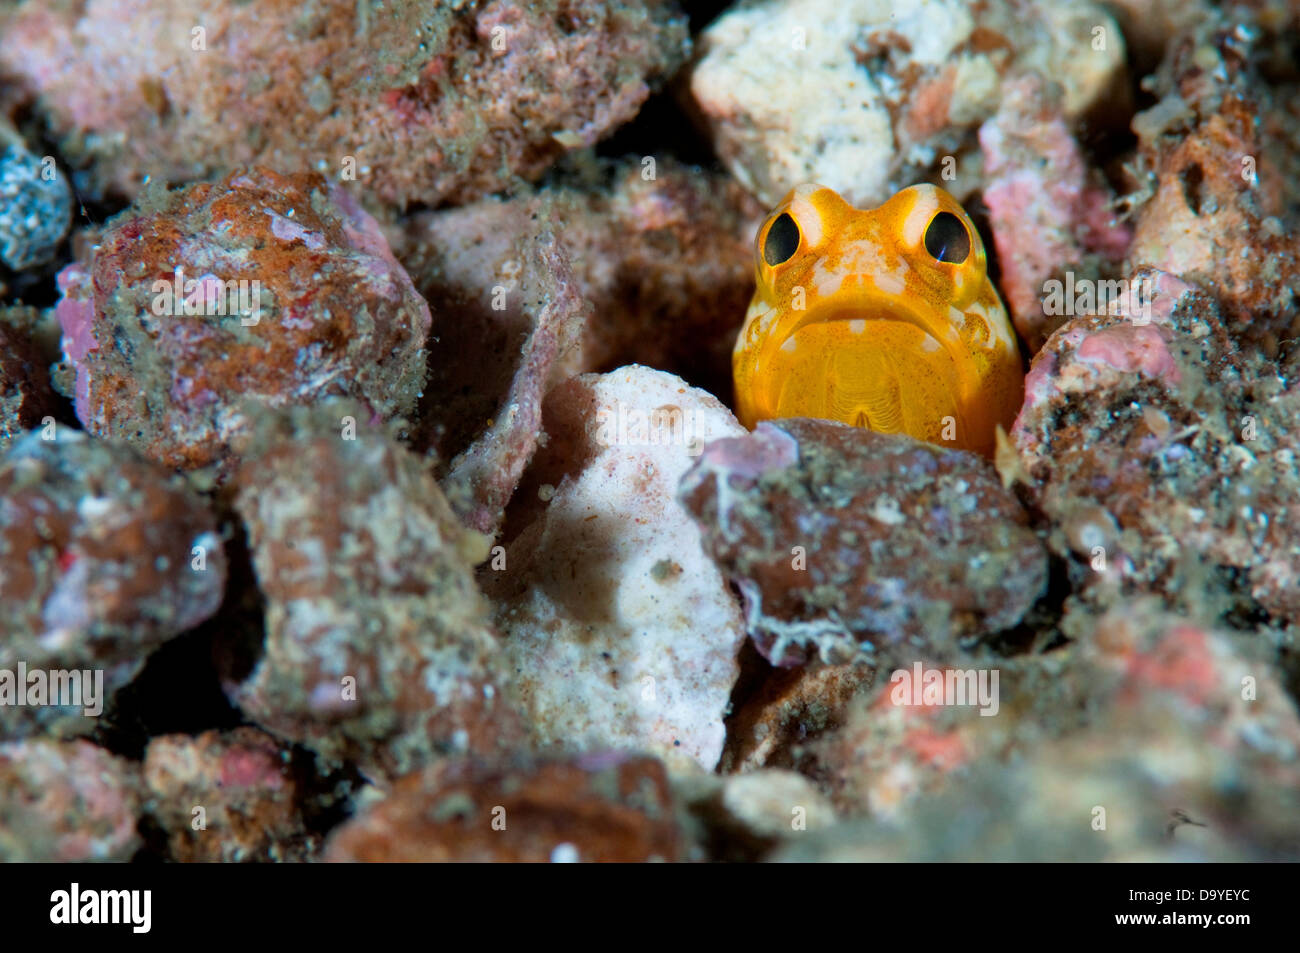 Solor Jawfish, Opistognathus solorensis, Only head poking out of rubble, Lembeh Strait, Sulawesi, Indonesia Stock Photo